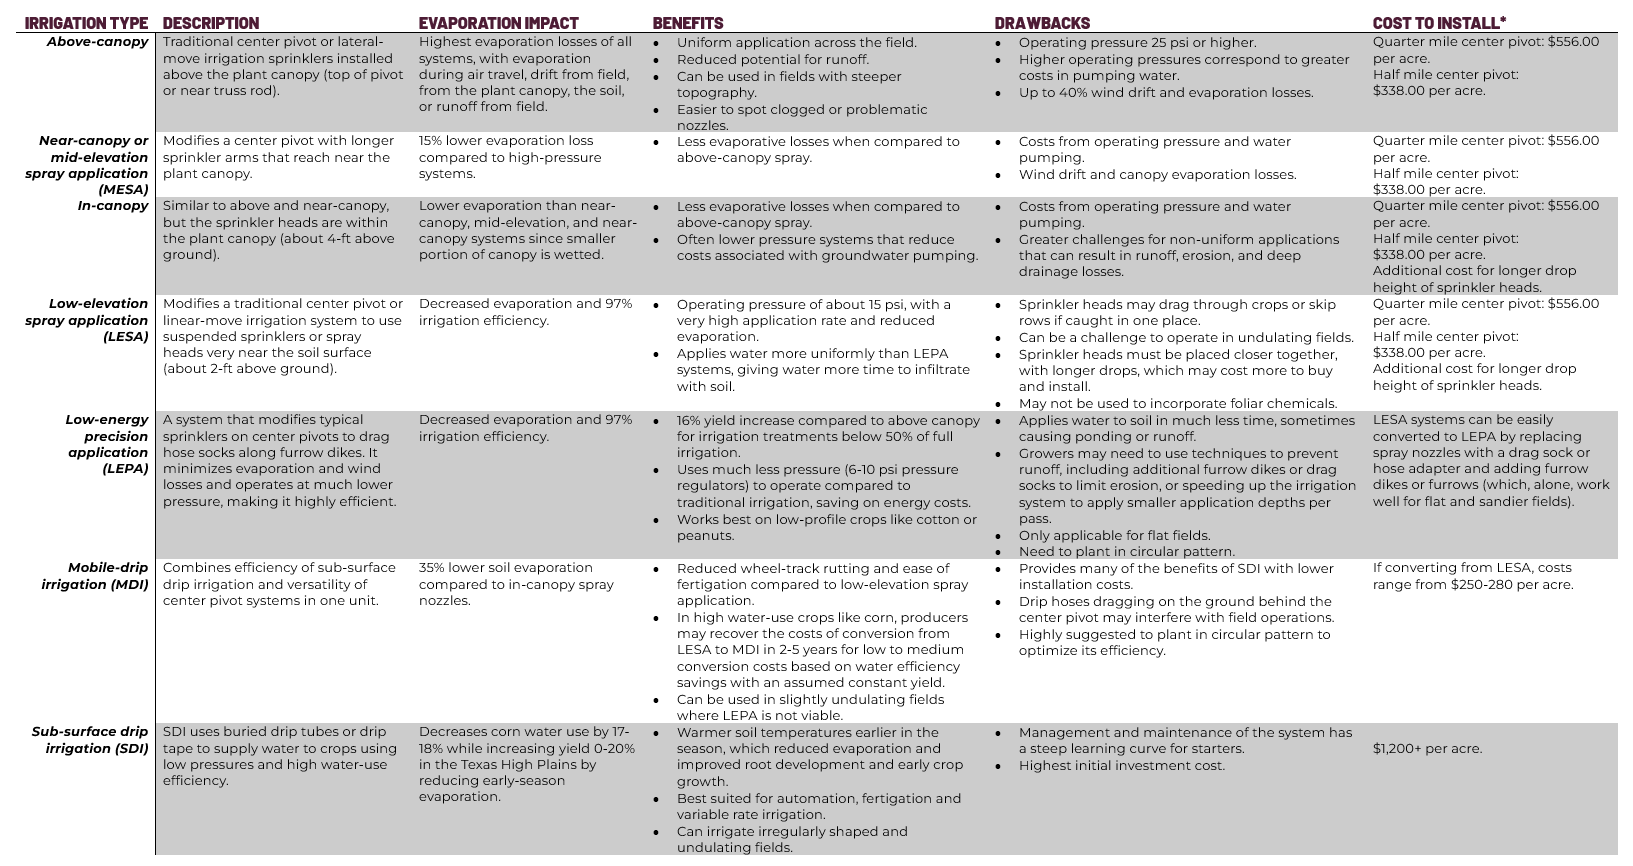 The image shows a descriptive table outlining the precipitation differences, costs to install, benefits, and drawbacks of different irrigation systems.